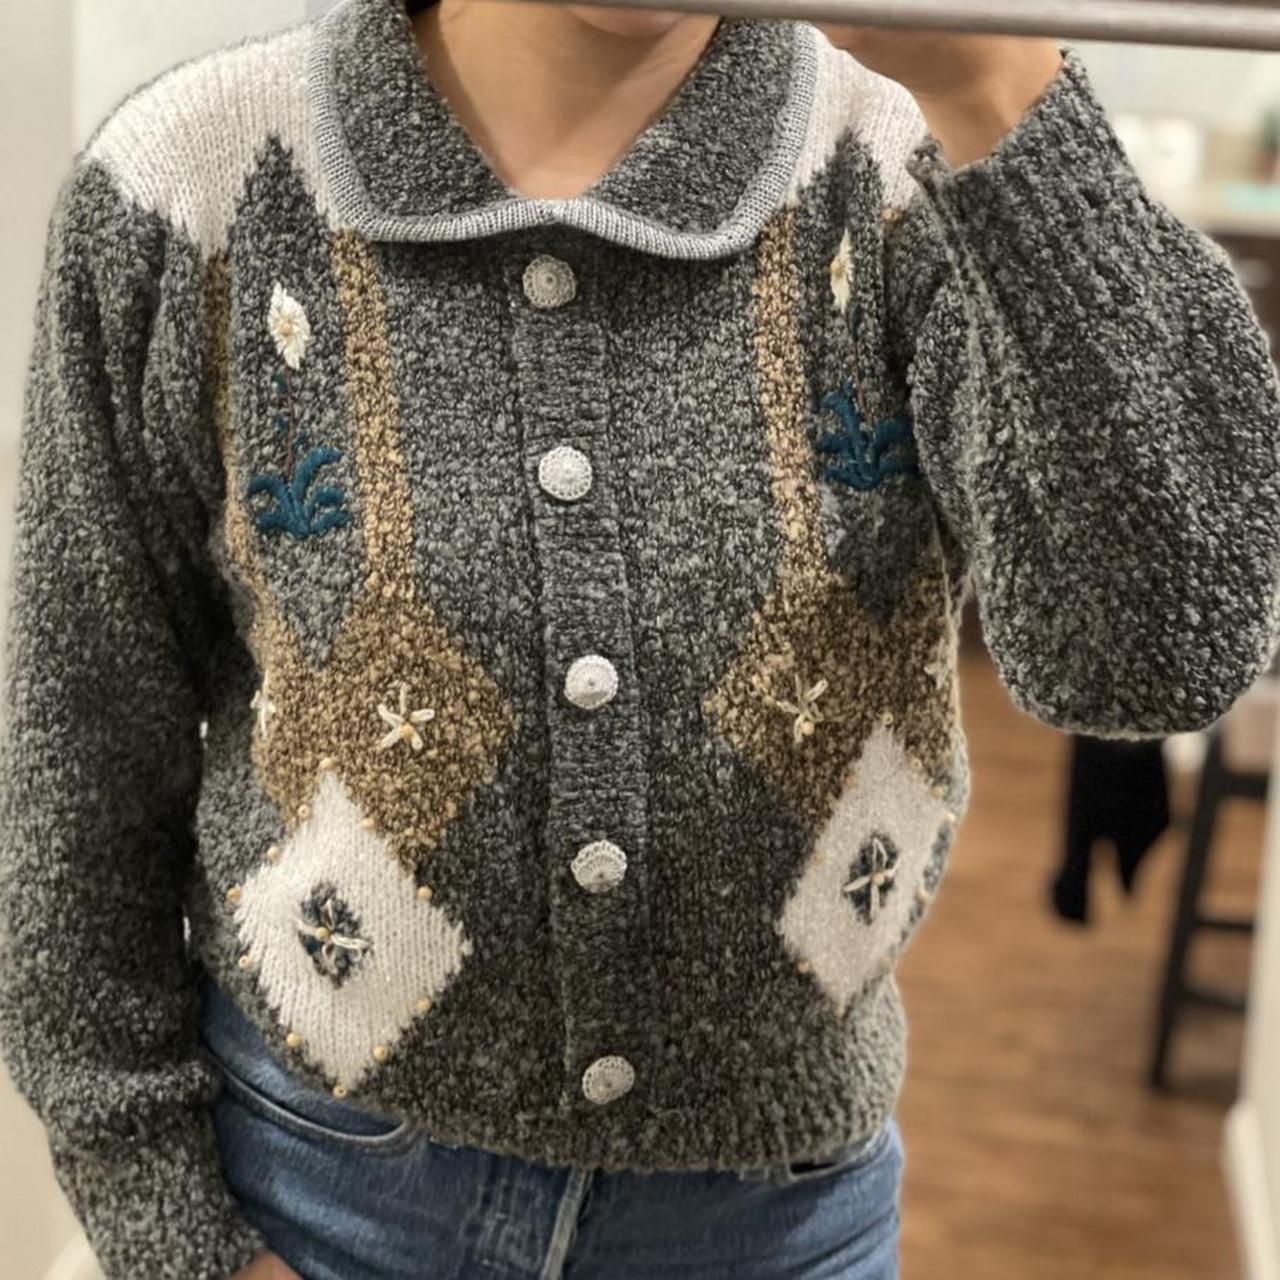 Product Image 1 - Vintage cardigan ❄️

Embroiders details 
no